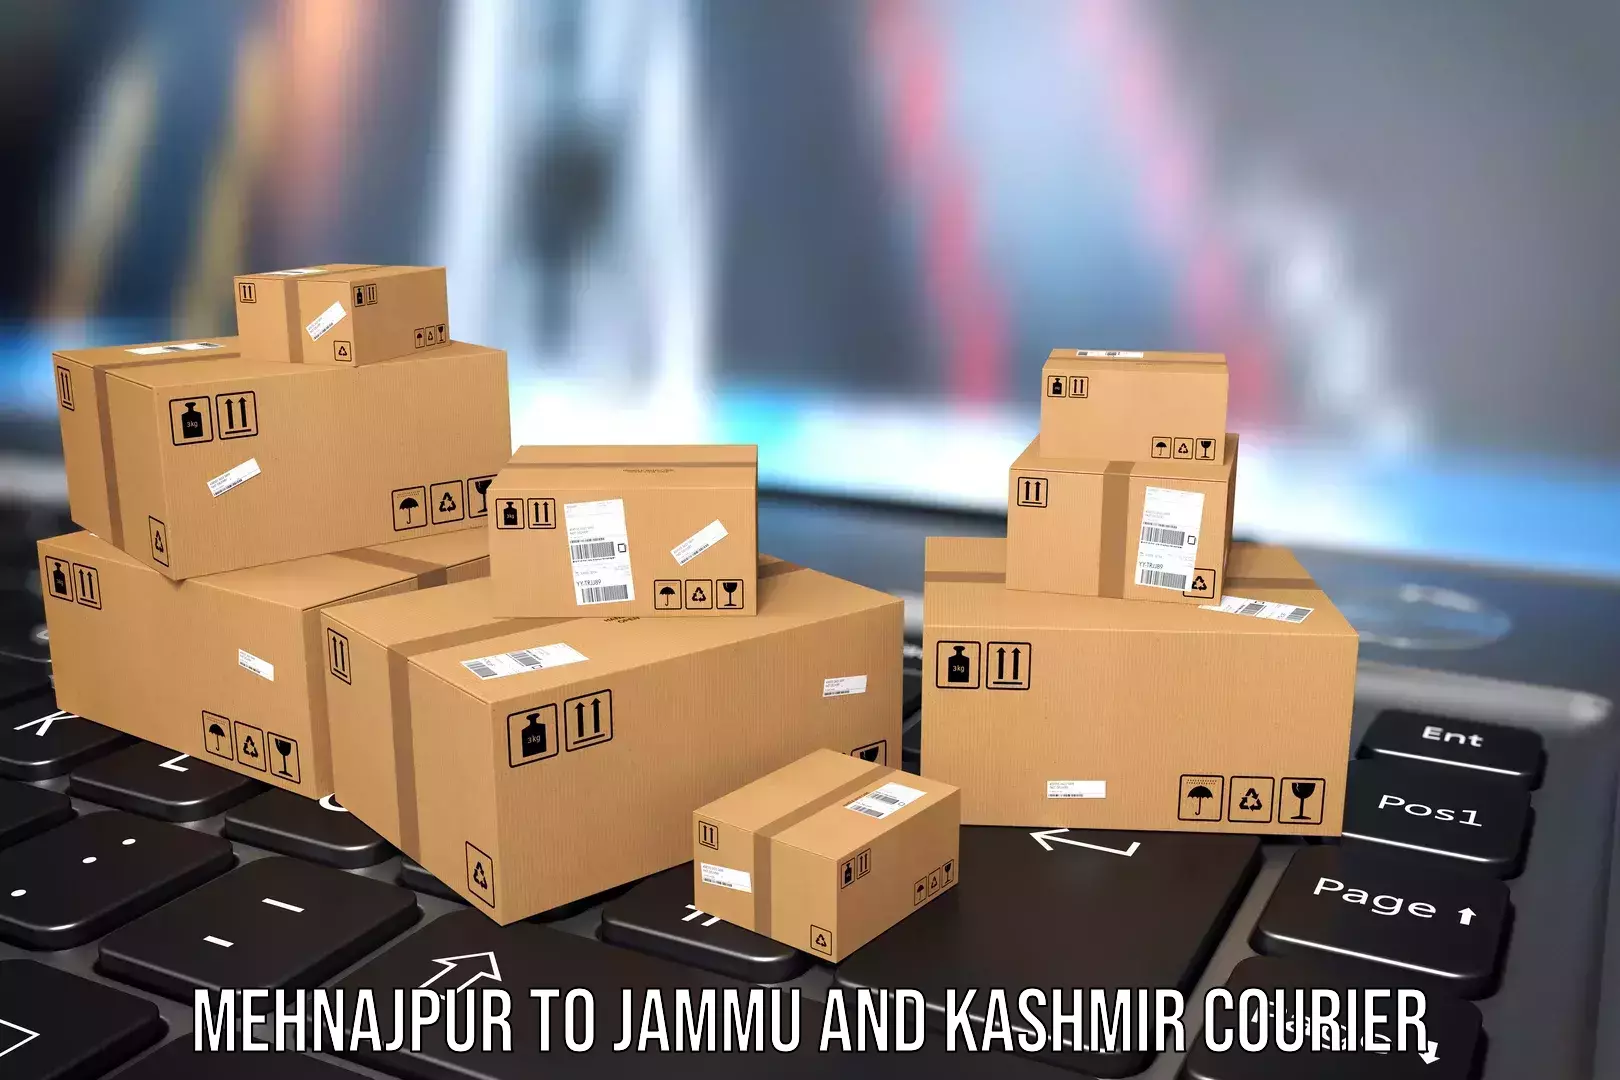 Luggage delivery network Mehnajpur to Jammu and Kashmir